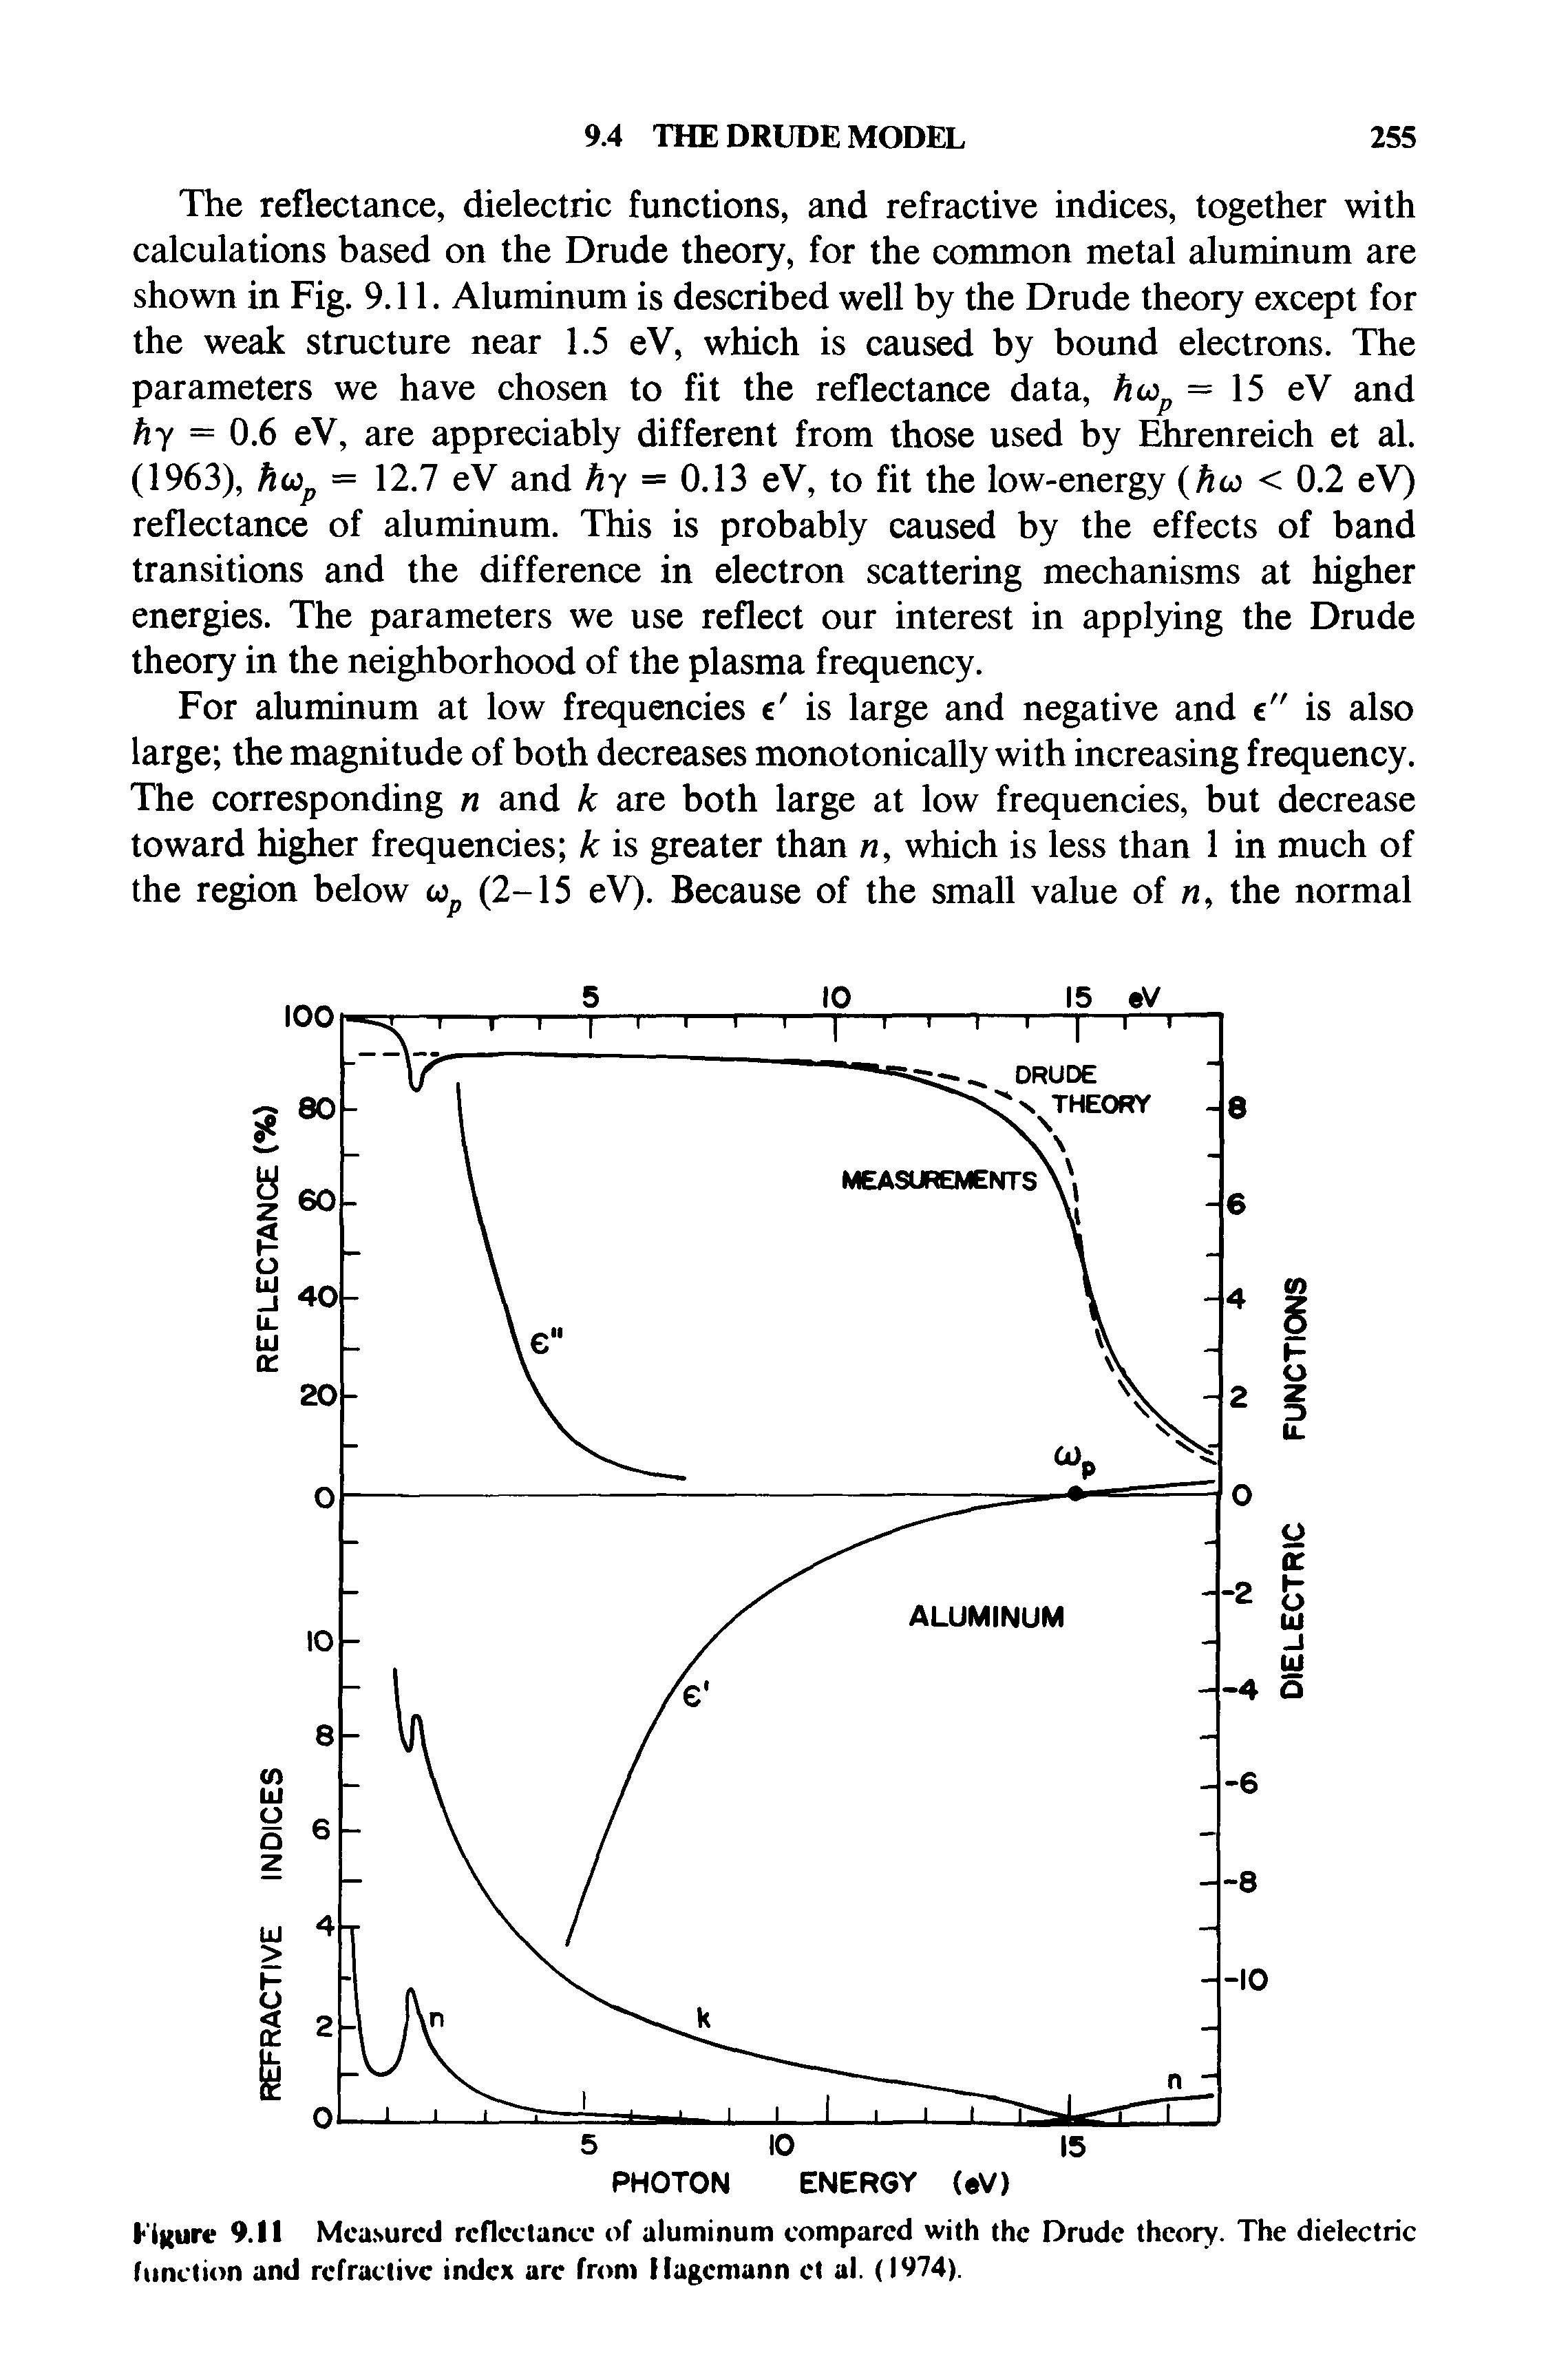 Figure 9.11 Measured reflectance of aluminum compared with the Drude theory. The dielectric (unction and refractive index are from Hagcmann et al. (1974).